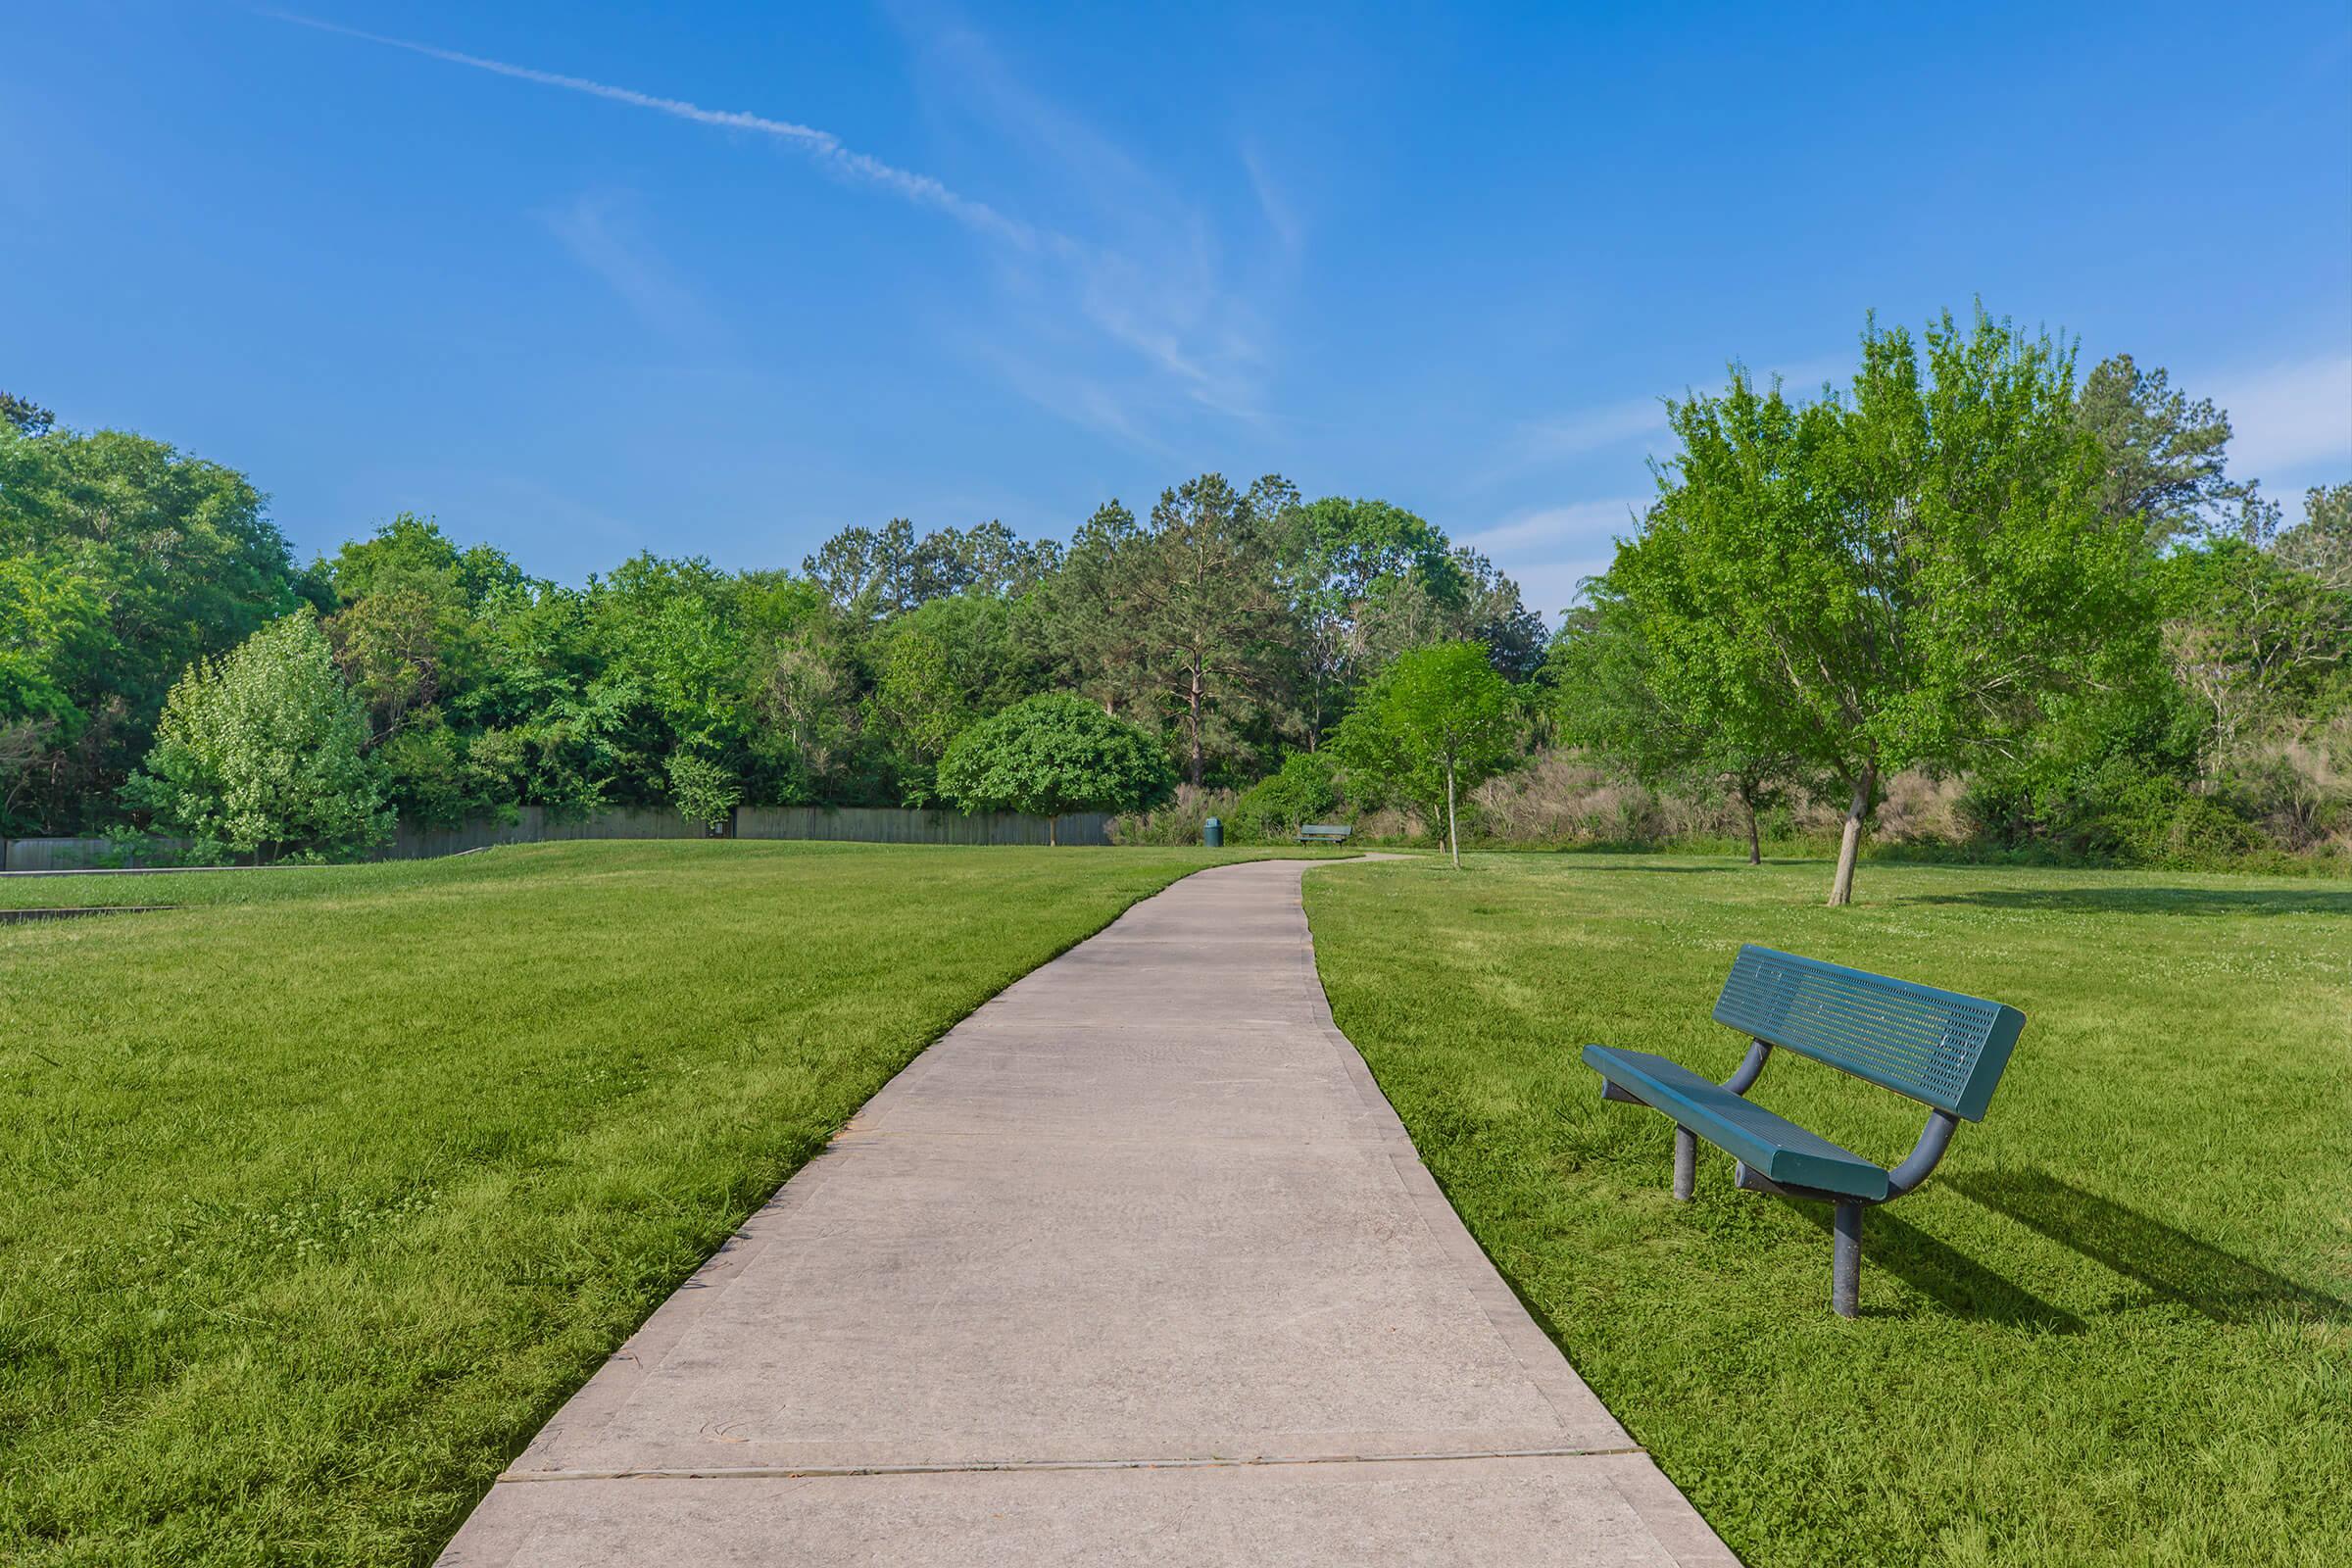 a blue bench in a park